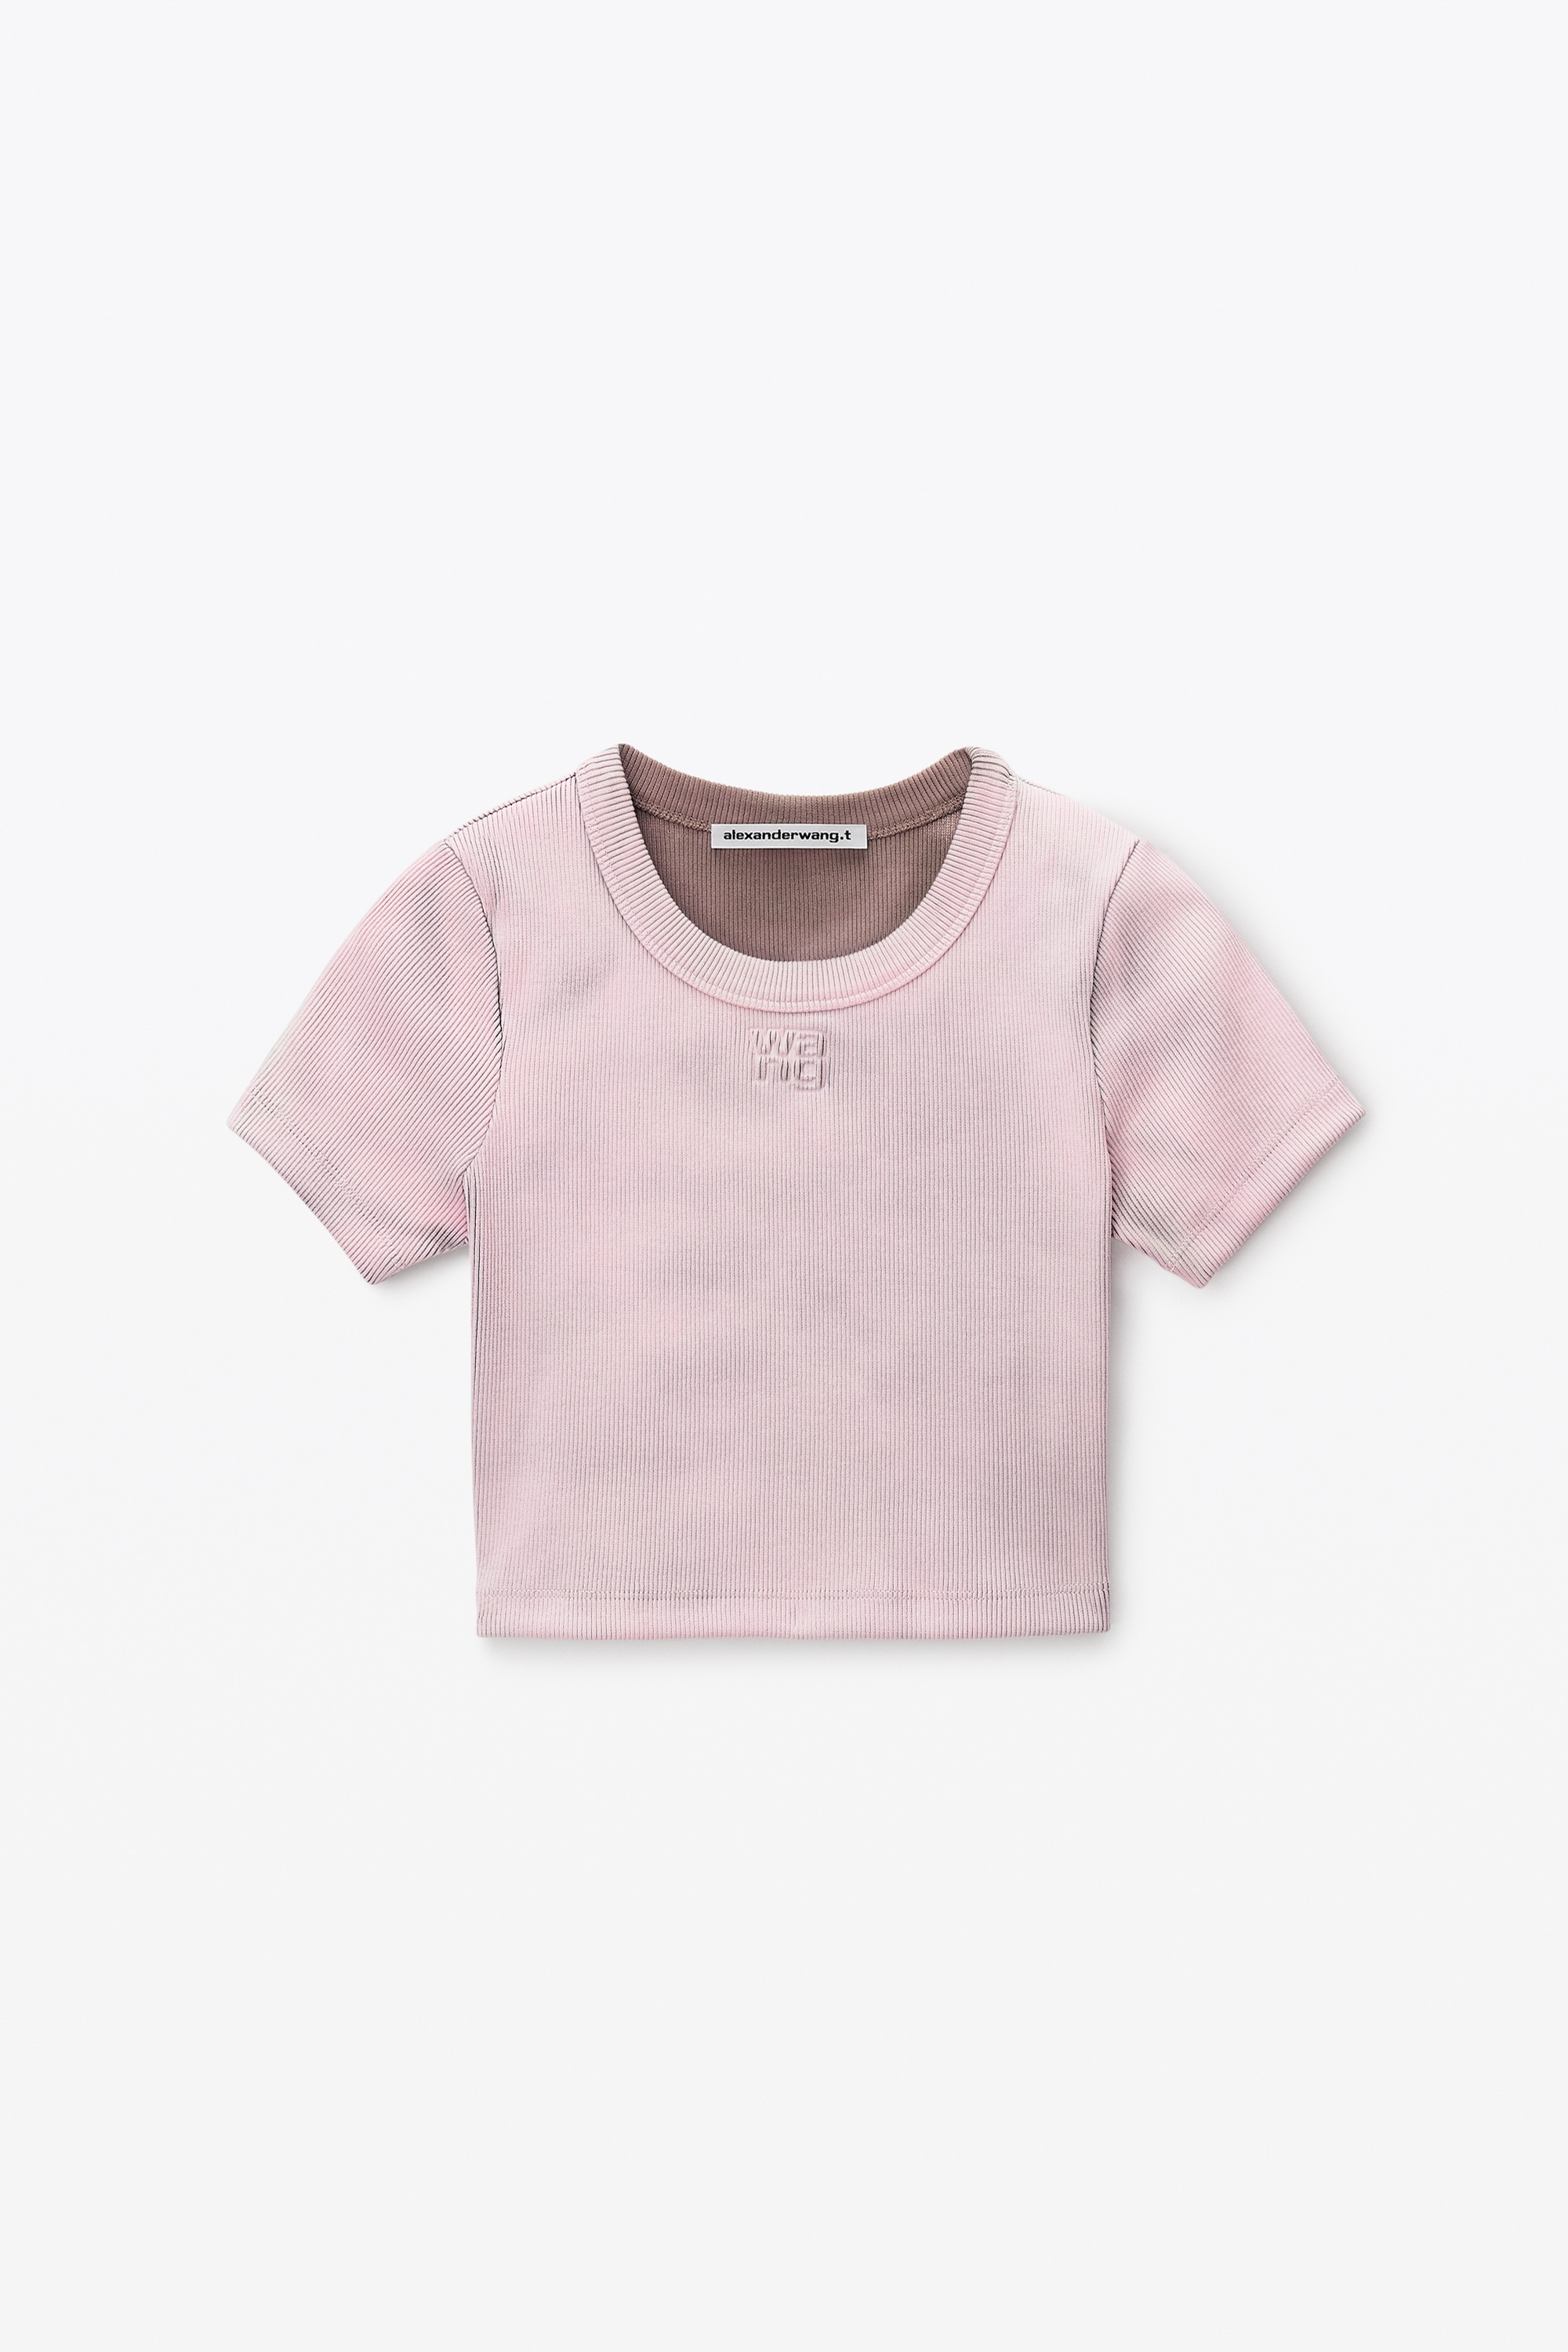 EMBOSSED LOGO CROPPED TOP - 1